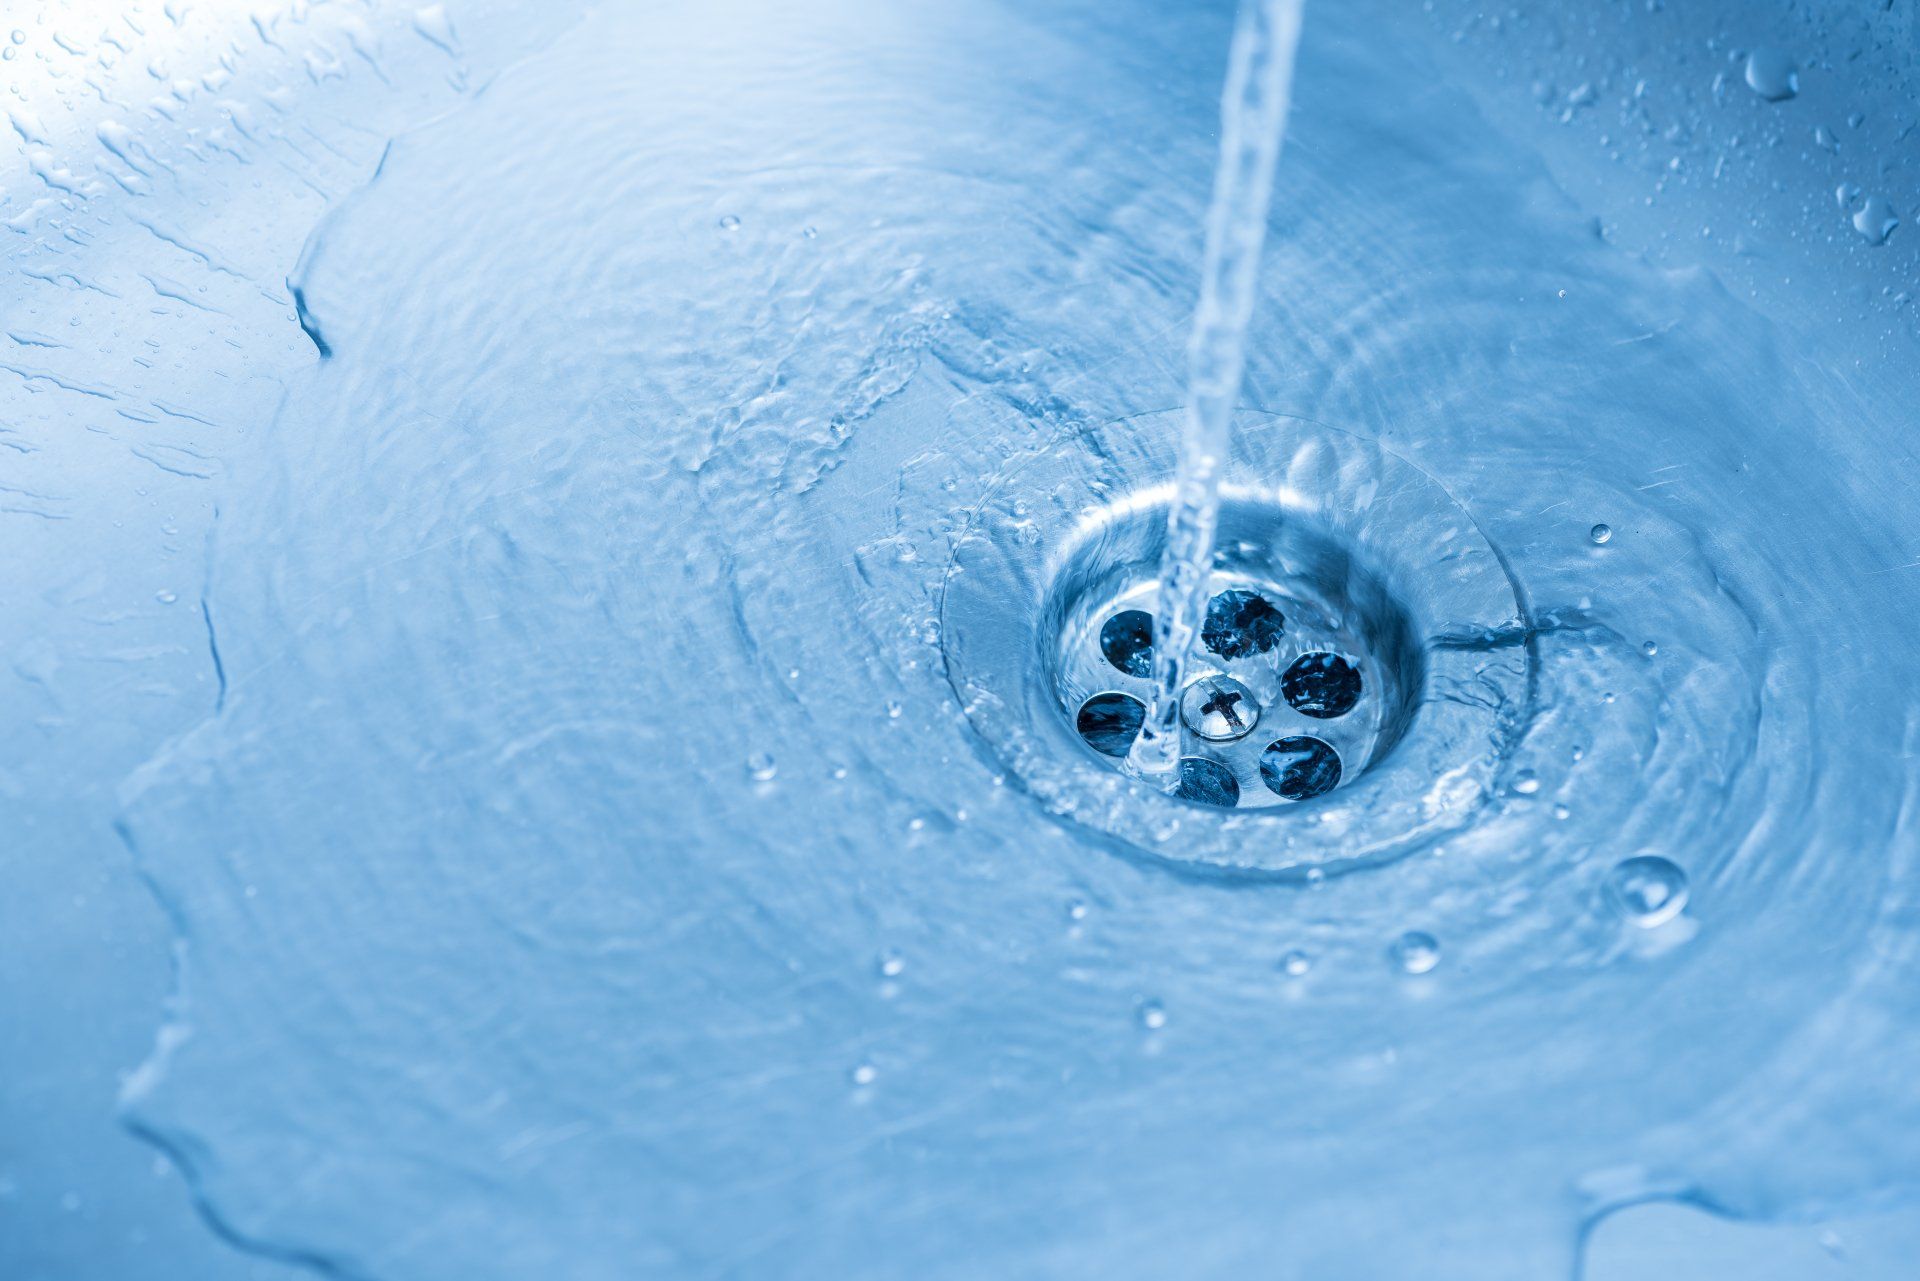 Drain Cleaning & Water Softening  - Plumbers in Conowingo, MD